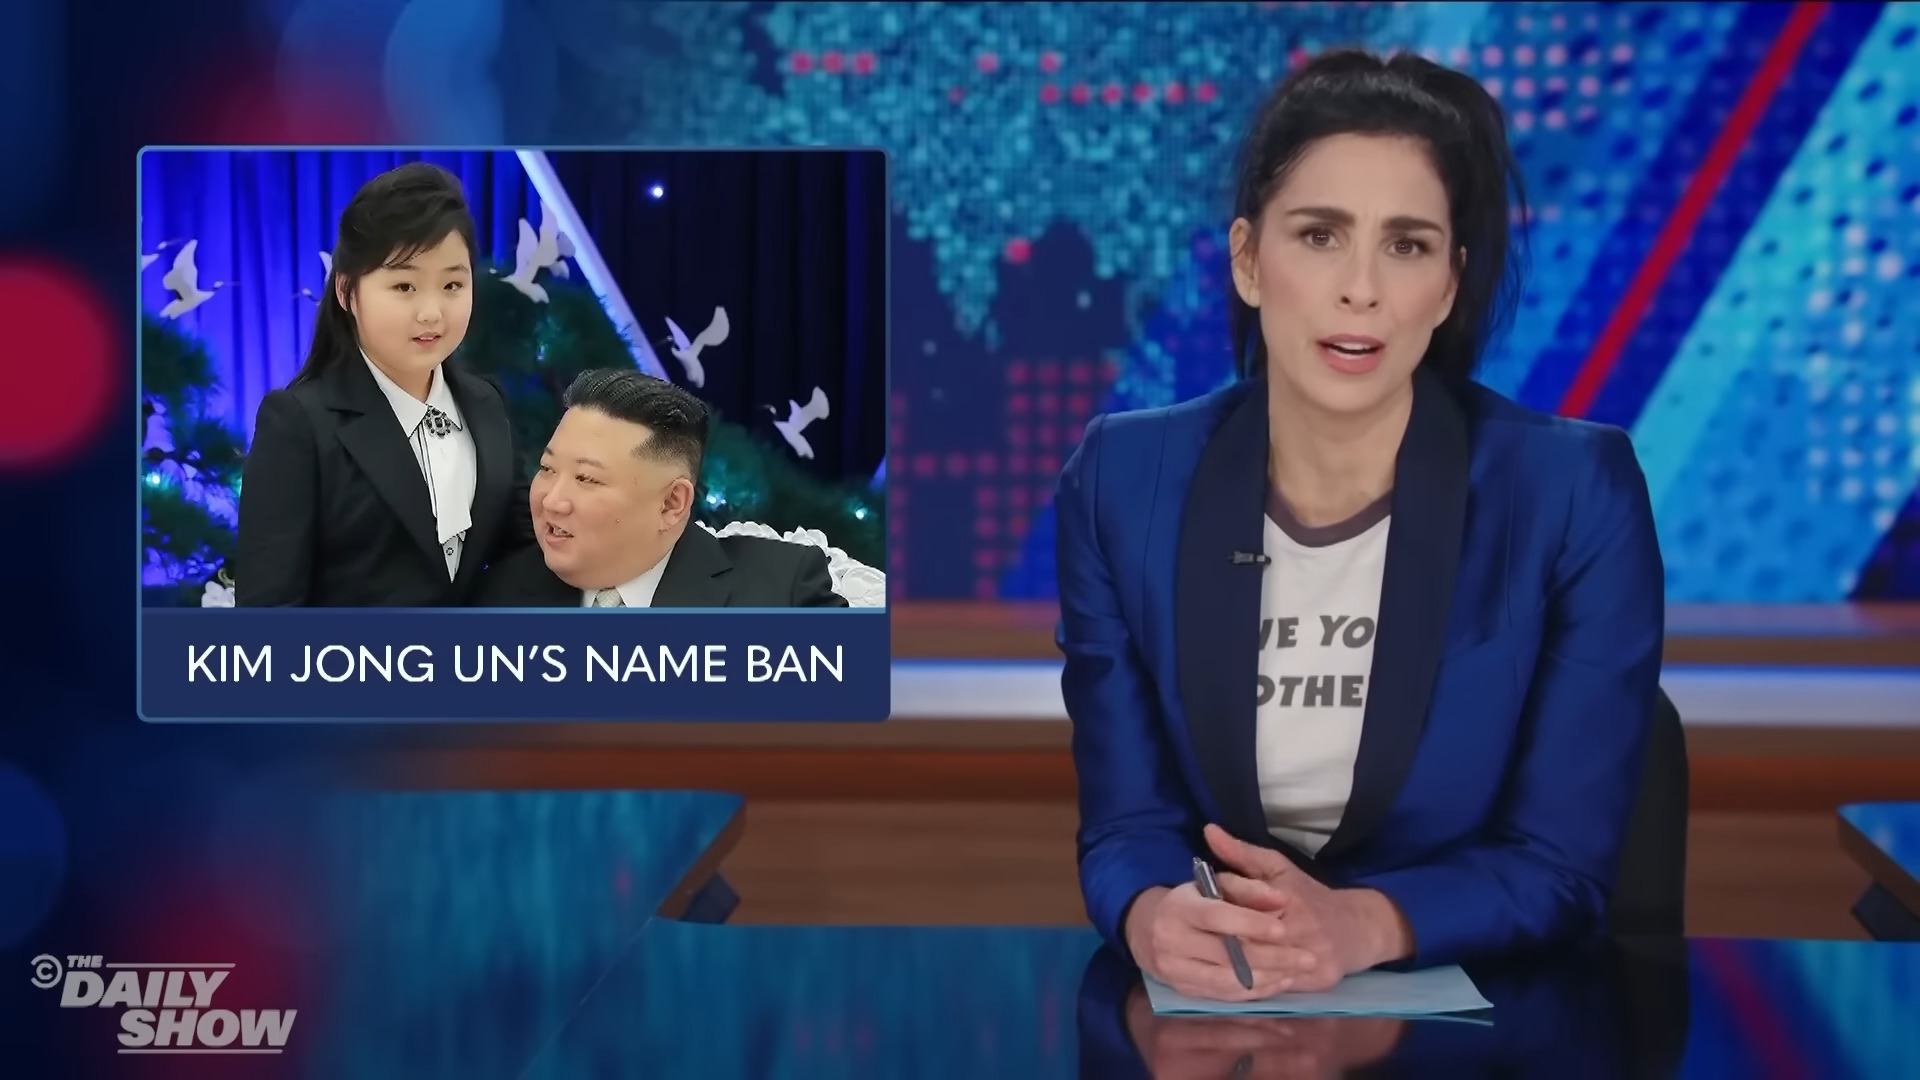 Sarah Silverman fills in as a guest-host for The Daily Show